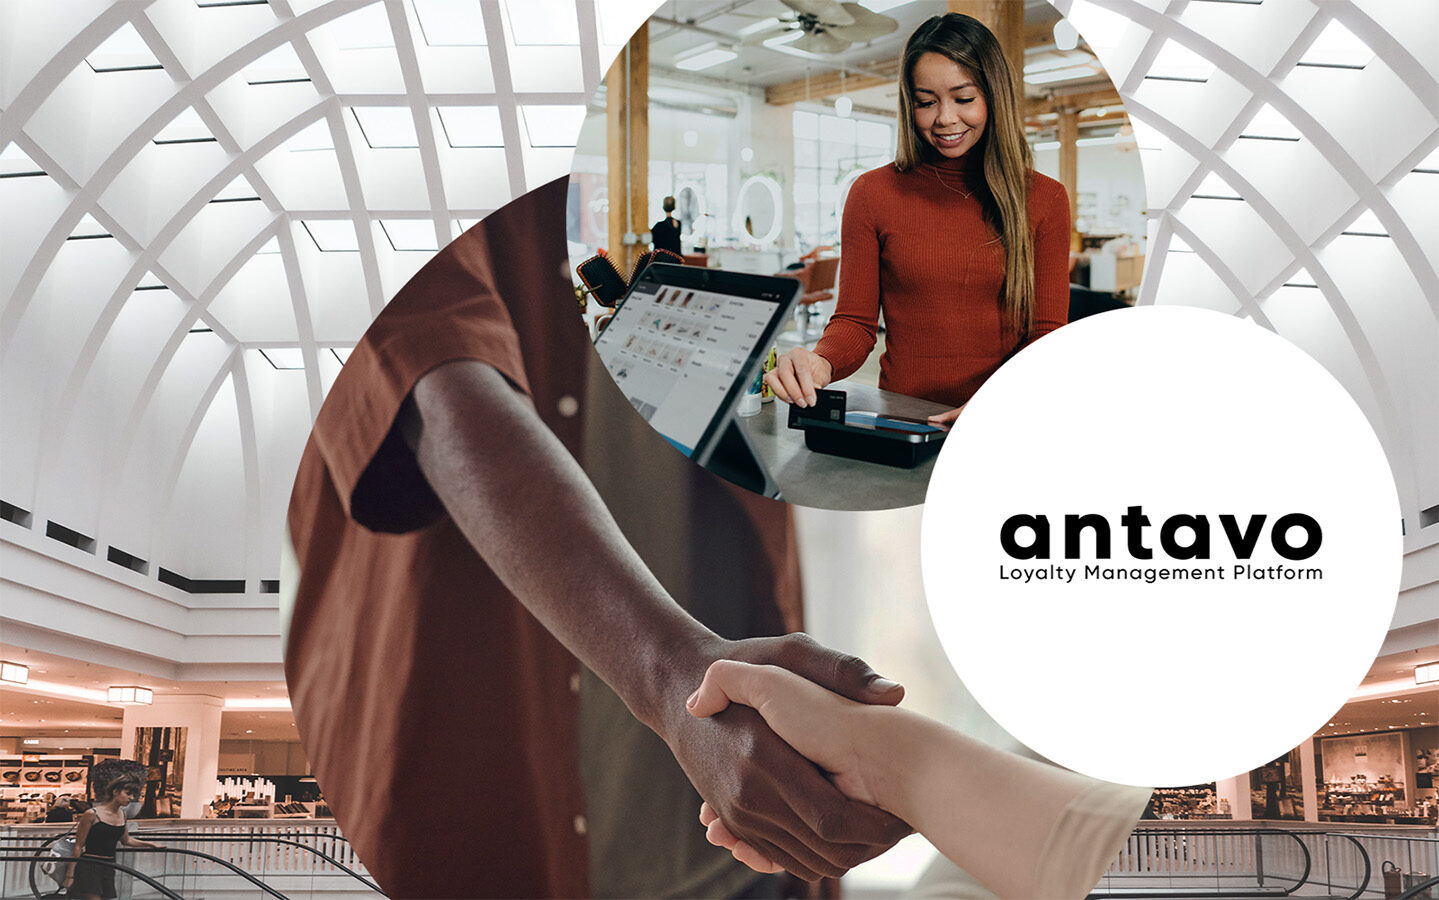 Handshake, woman pays with card and logo of antavo